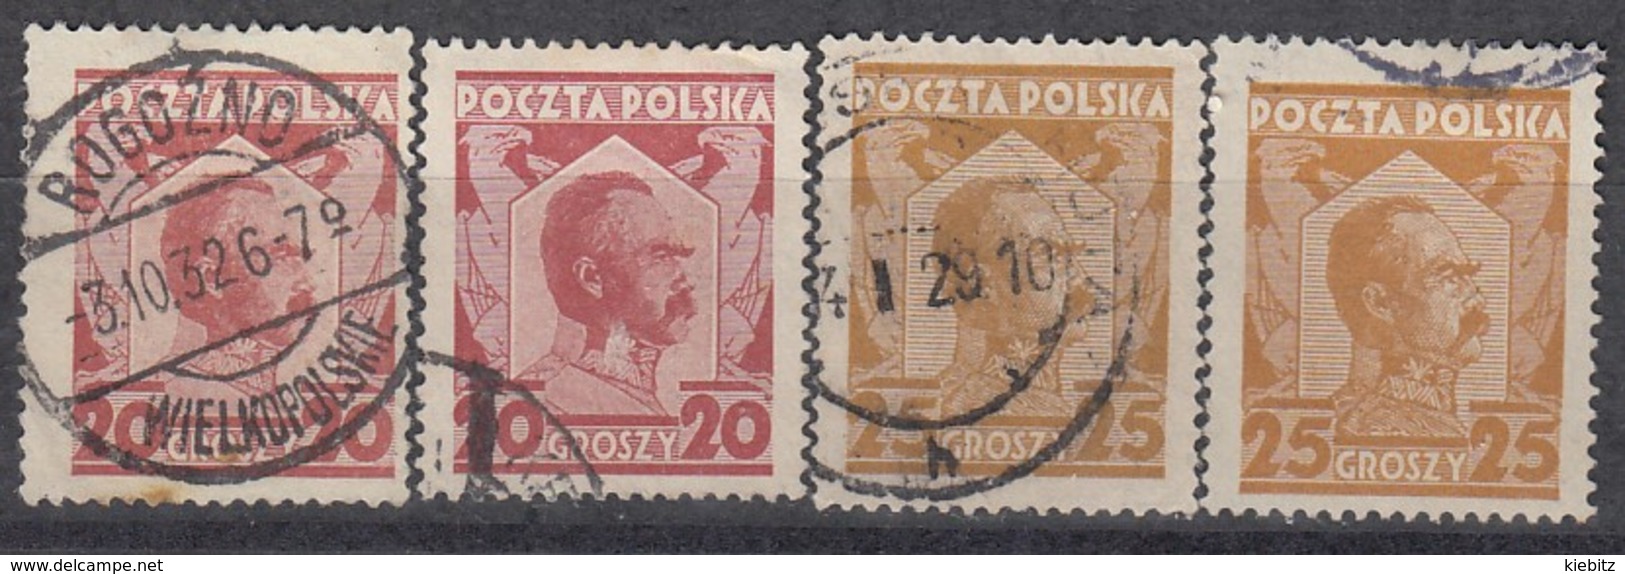 POLEN  1927 - MiNr: 245+253  Used - Used Stamps